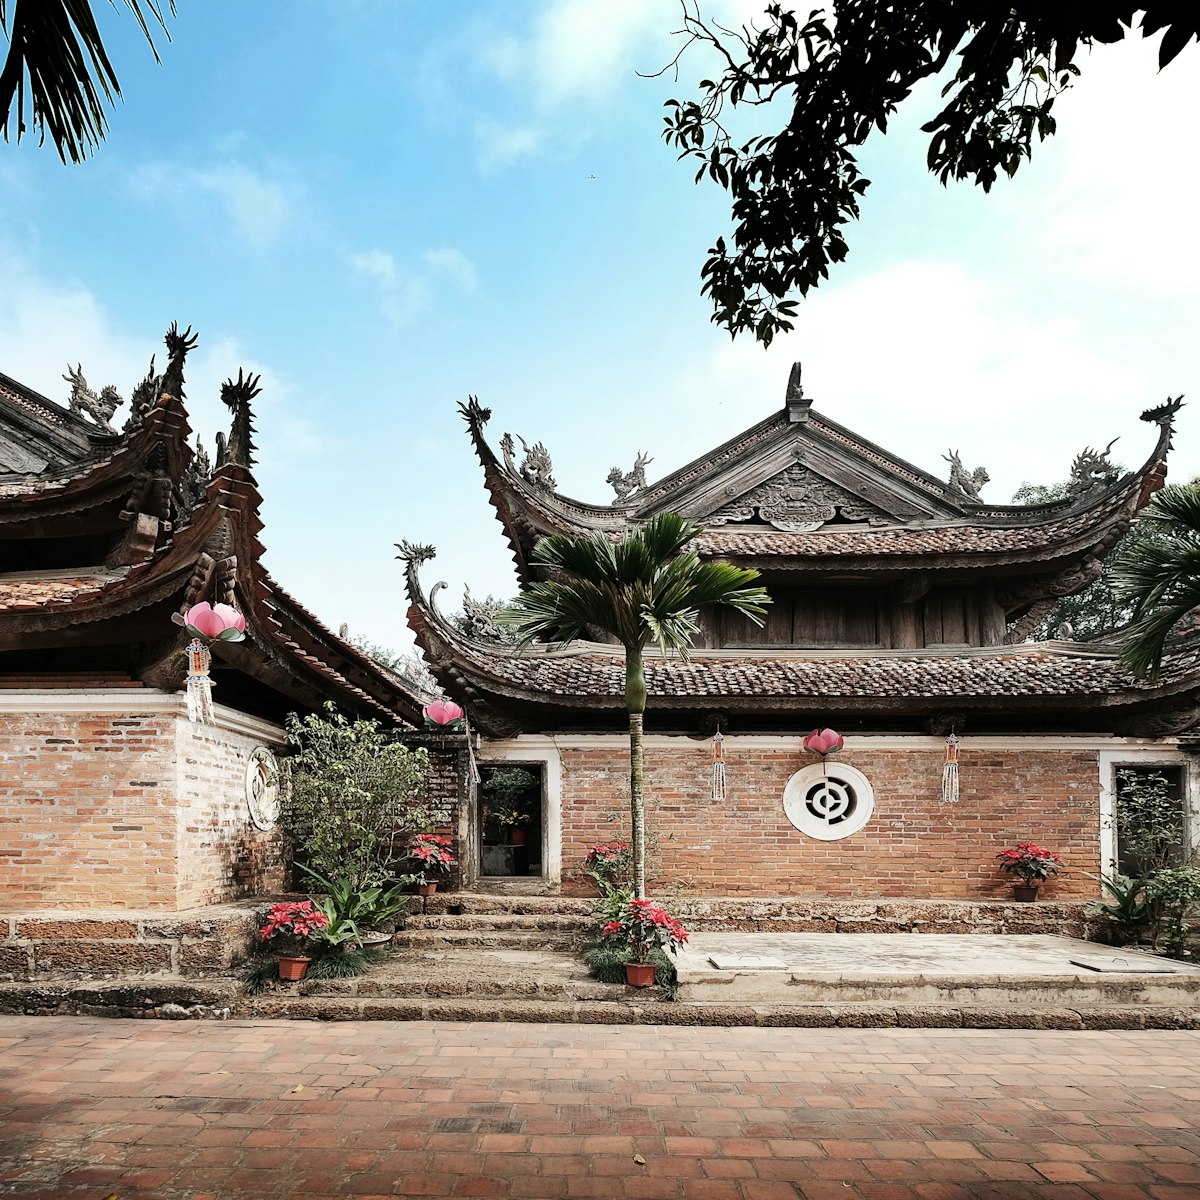 Tay Phuong Pagoda - one of the most ancient pagodas in Vietnam.